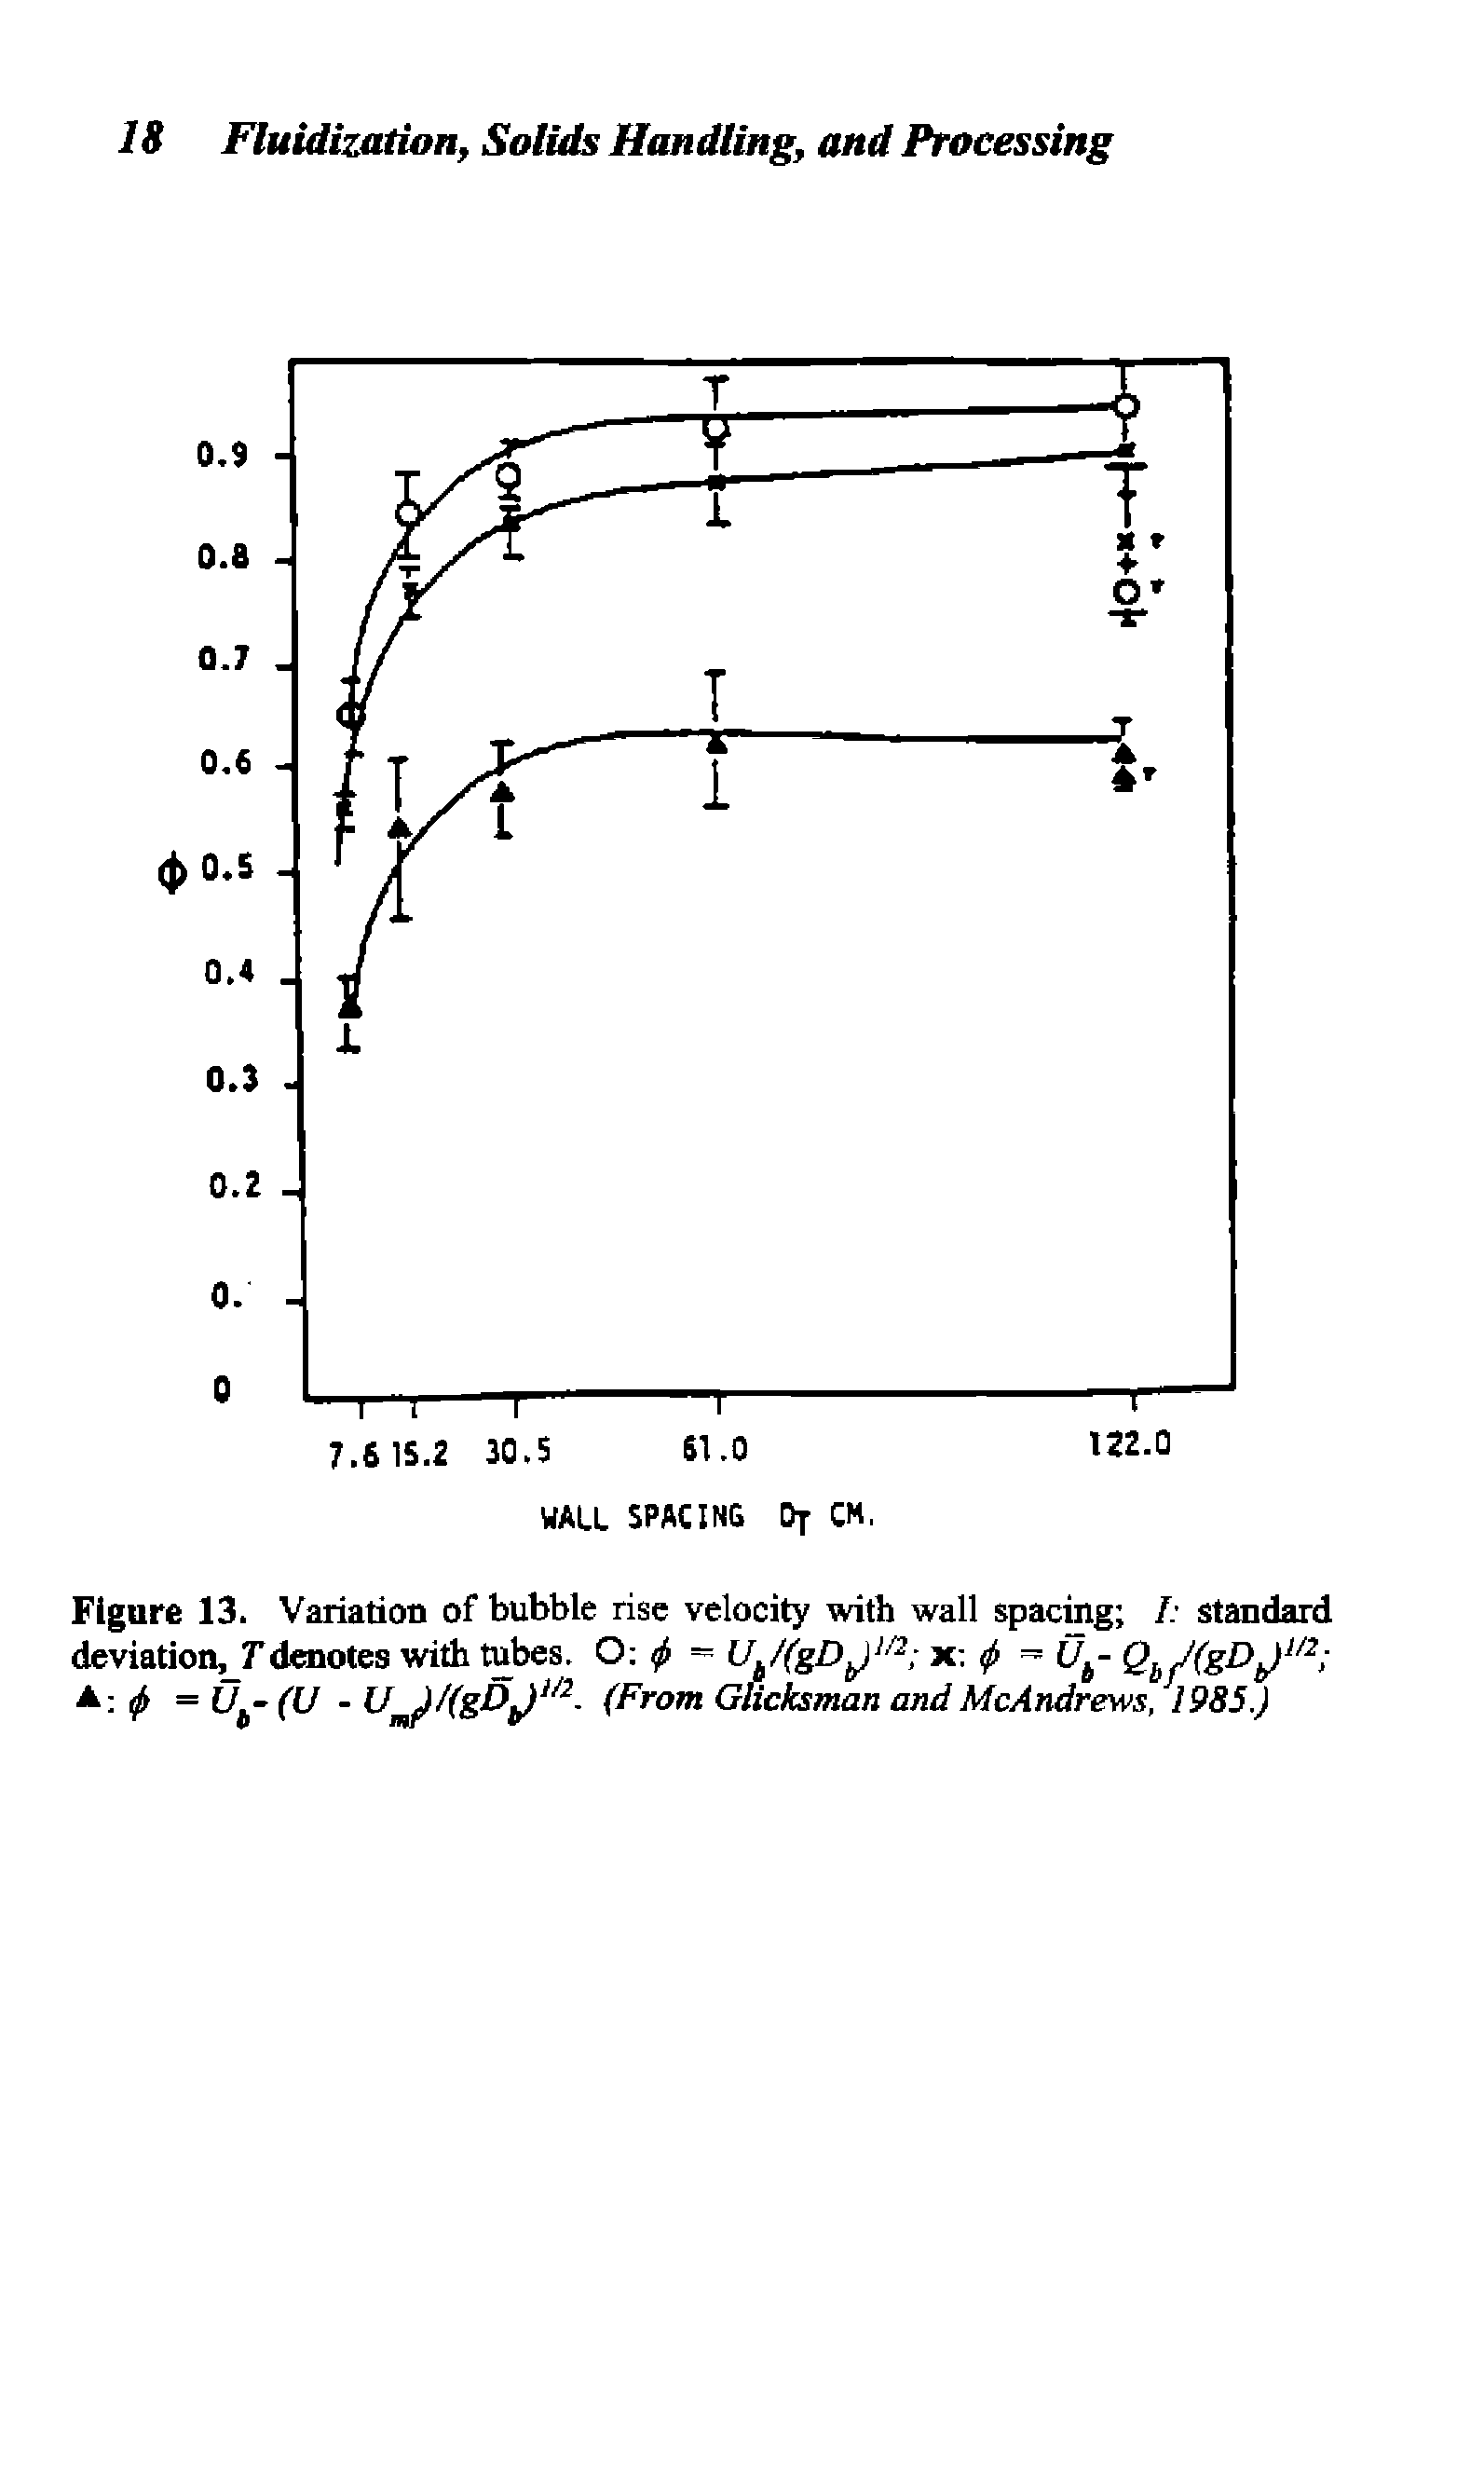 Figure 13. Variation of bubble rise velocity with wall spacing I standard deviation, Fdenotes with tubes. O tf> = U./(gD /2 x - Ub- QbJ(gDb)1/2 V <f> =Ub-(U -U(From Glicksman and Me Andrews, 1985.)...